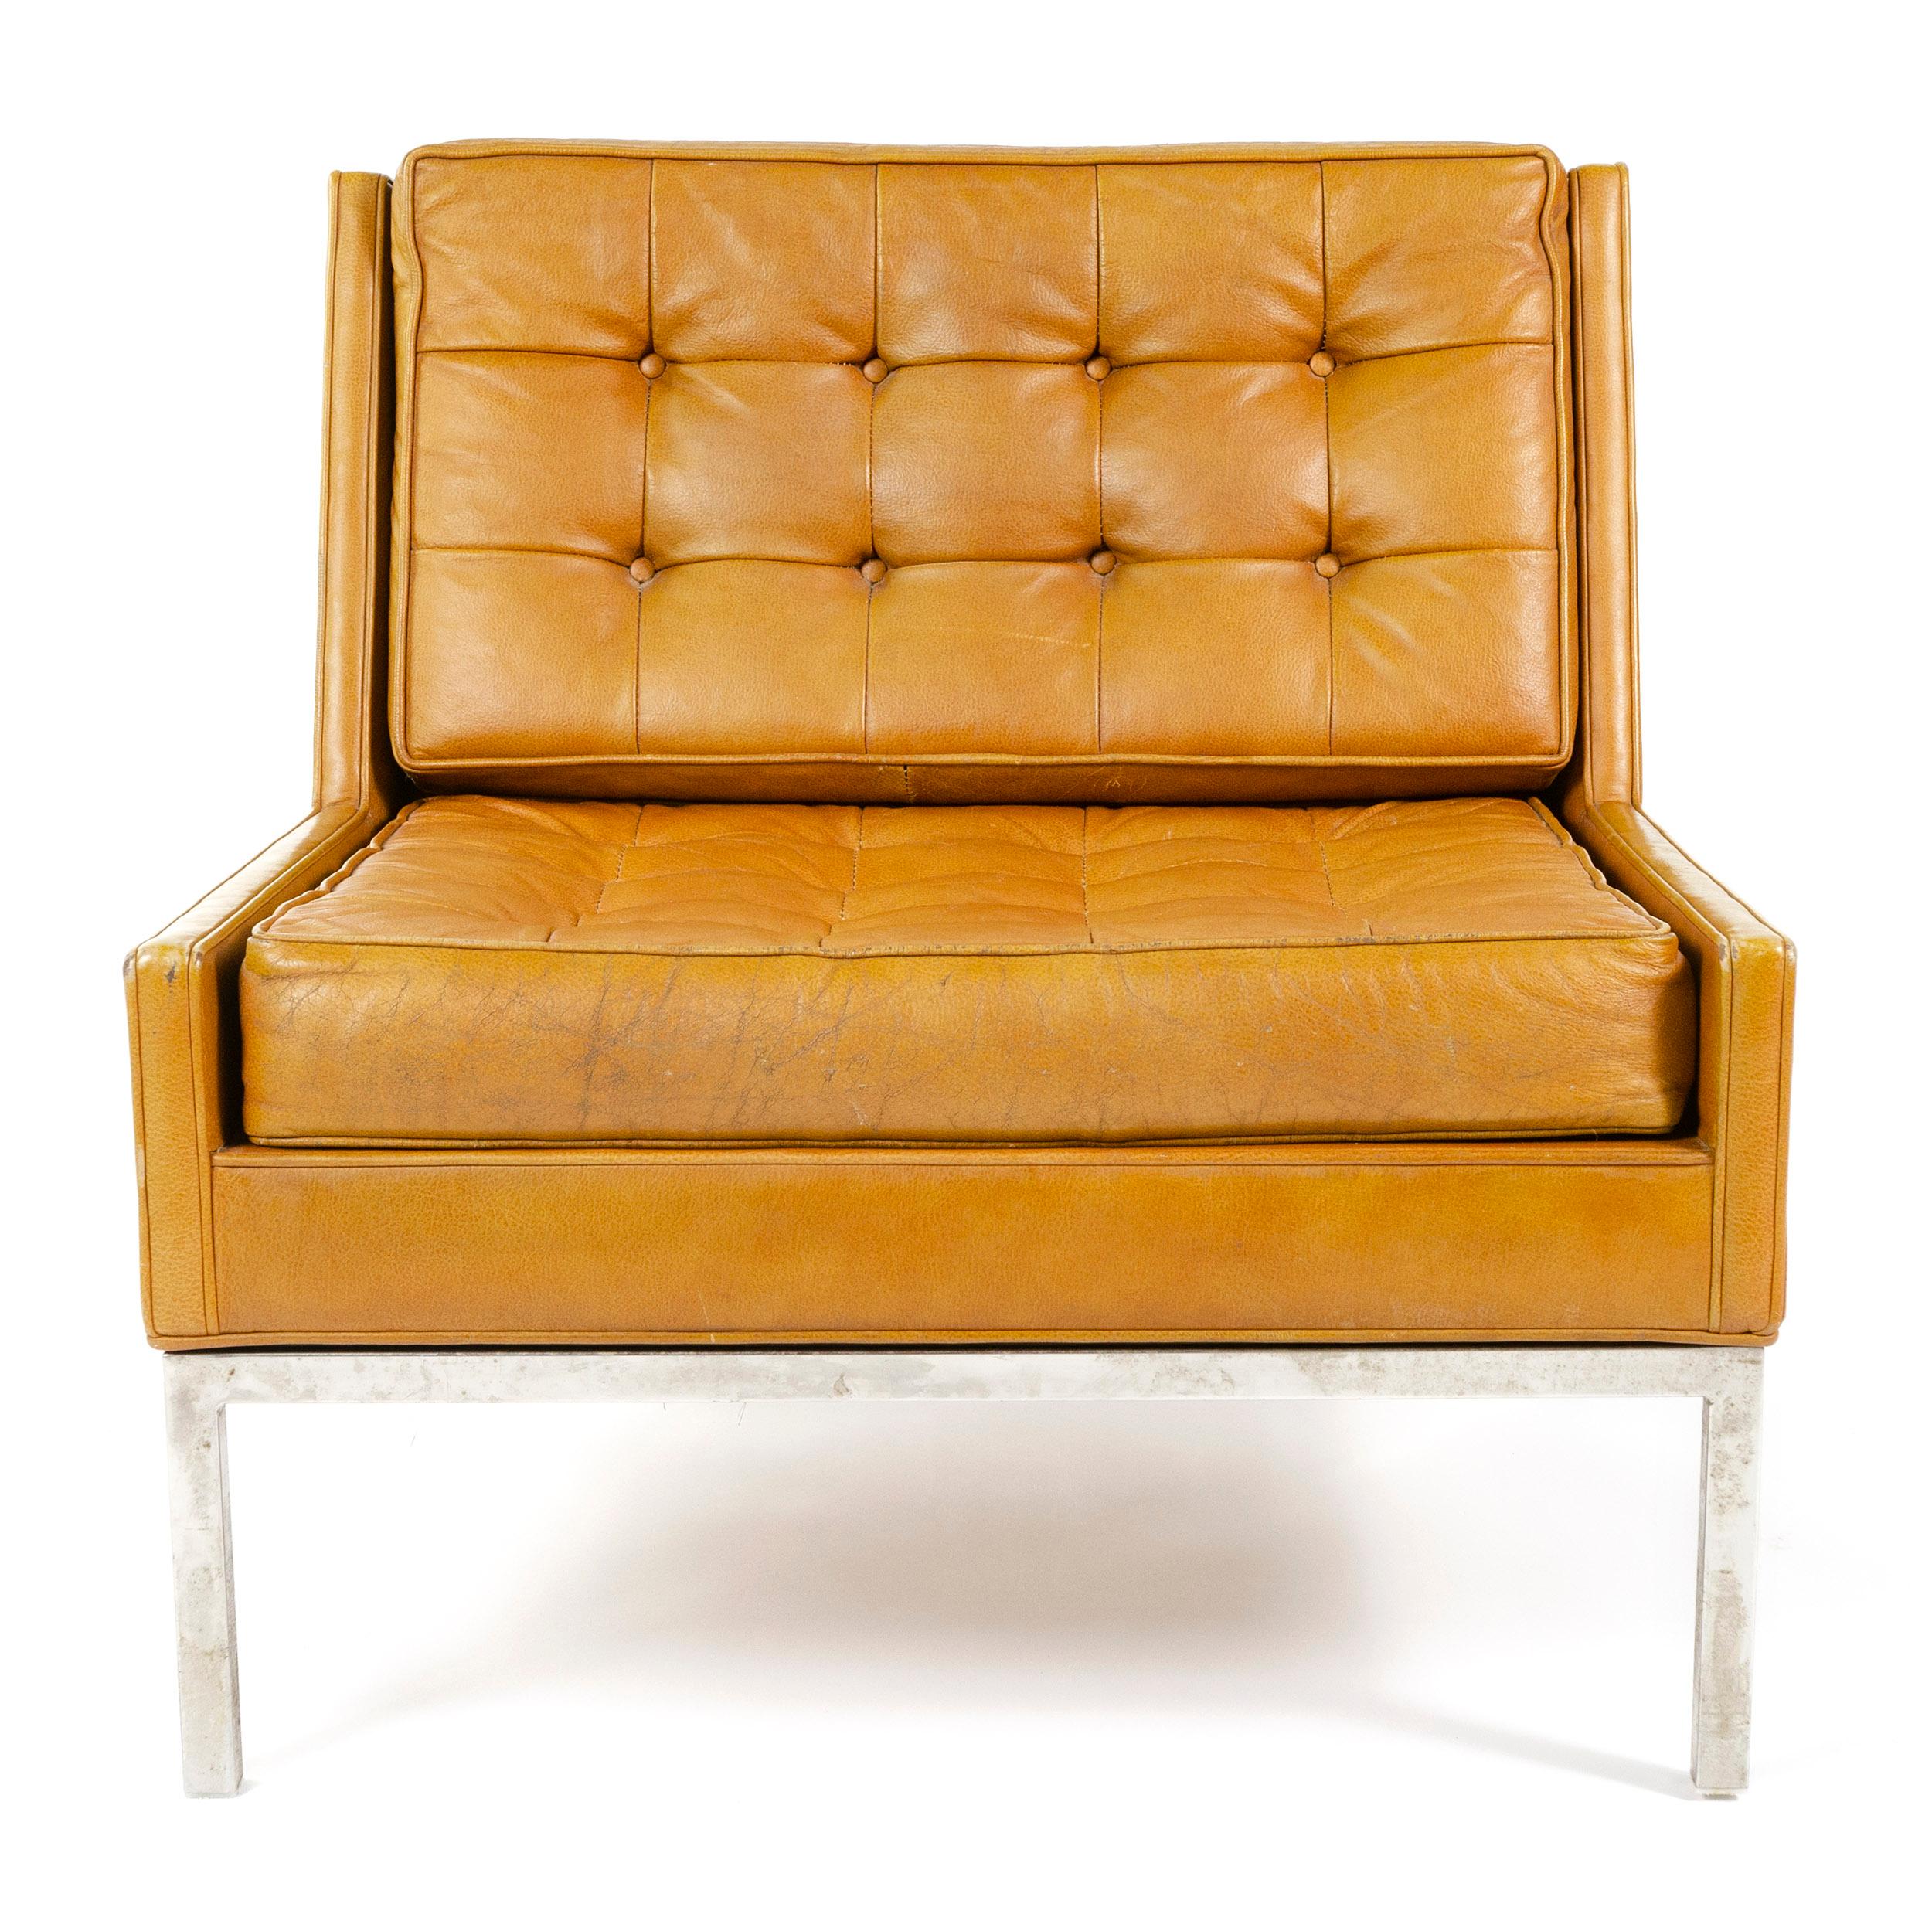 Dunbar leather lounge chair its frame having slightly raised sides as well a slight 'wing' effect to the back together forming channels which the button tufted seat and back cushions fit in to allowing the cushions to sit flush with the sides and